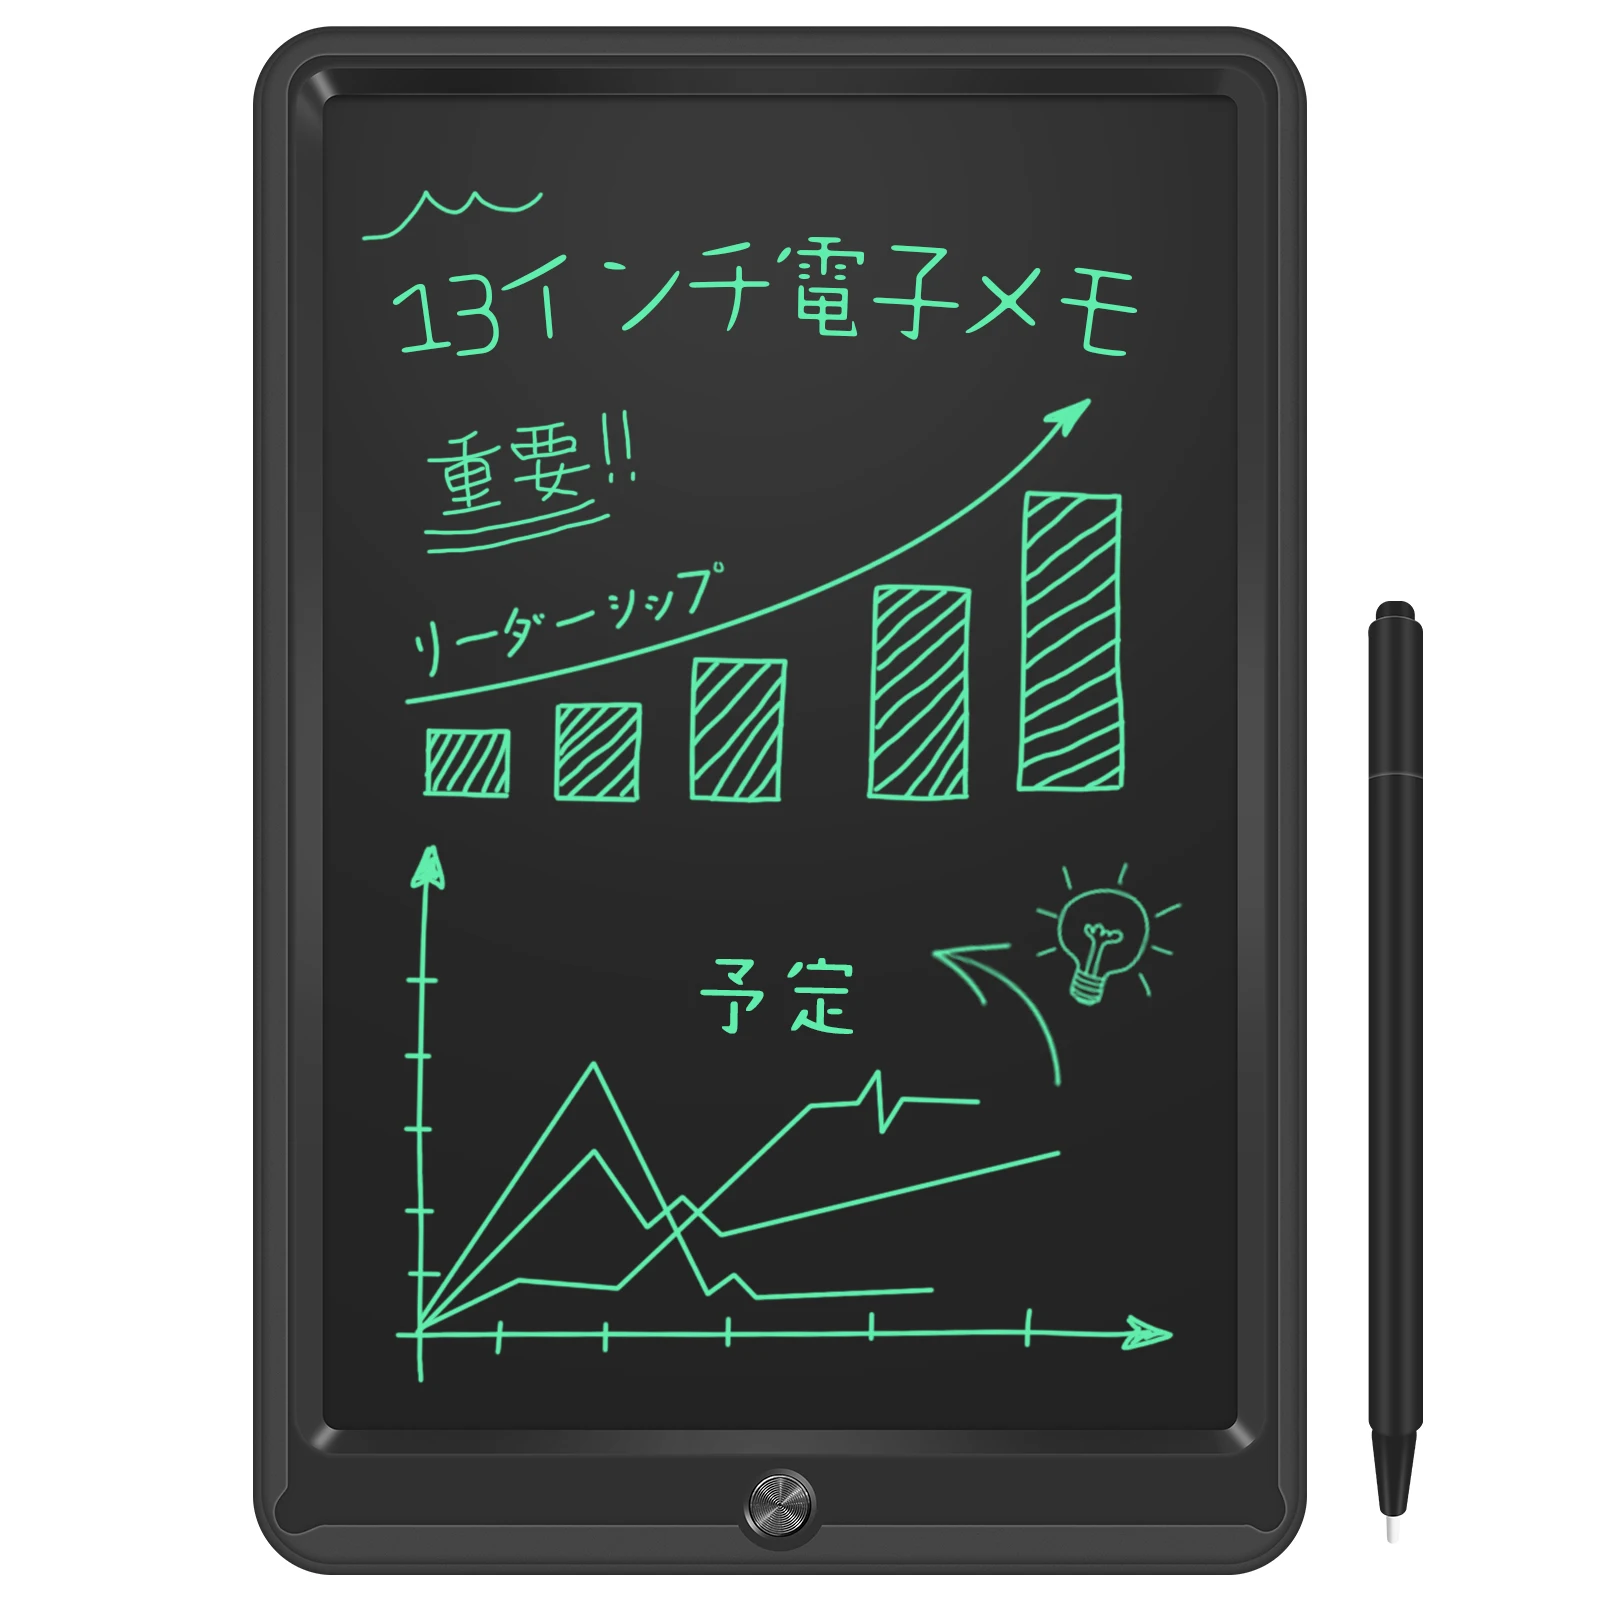 NEWYES 13.5 Inch Graphic Tablet Drawing Digital Electronic Board LCD Hand Writing Pad with Stylus Pen Birthday Gift for Kids